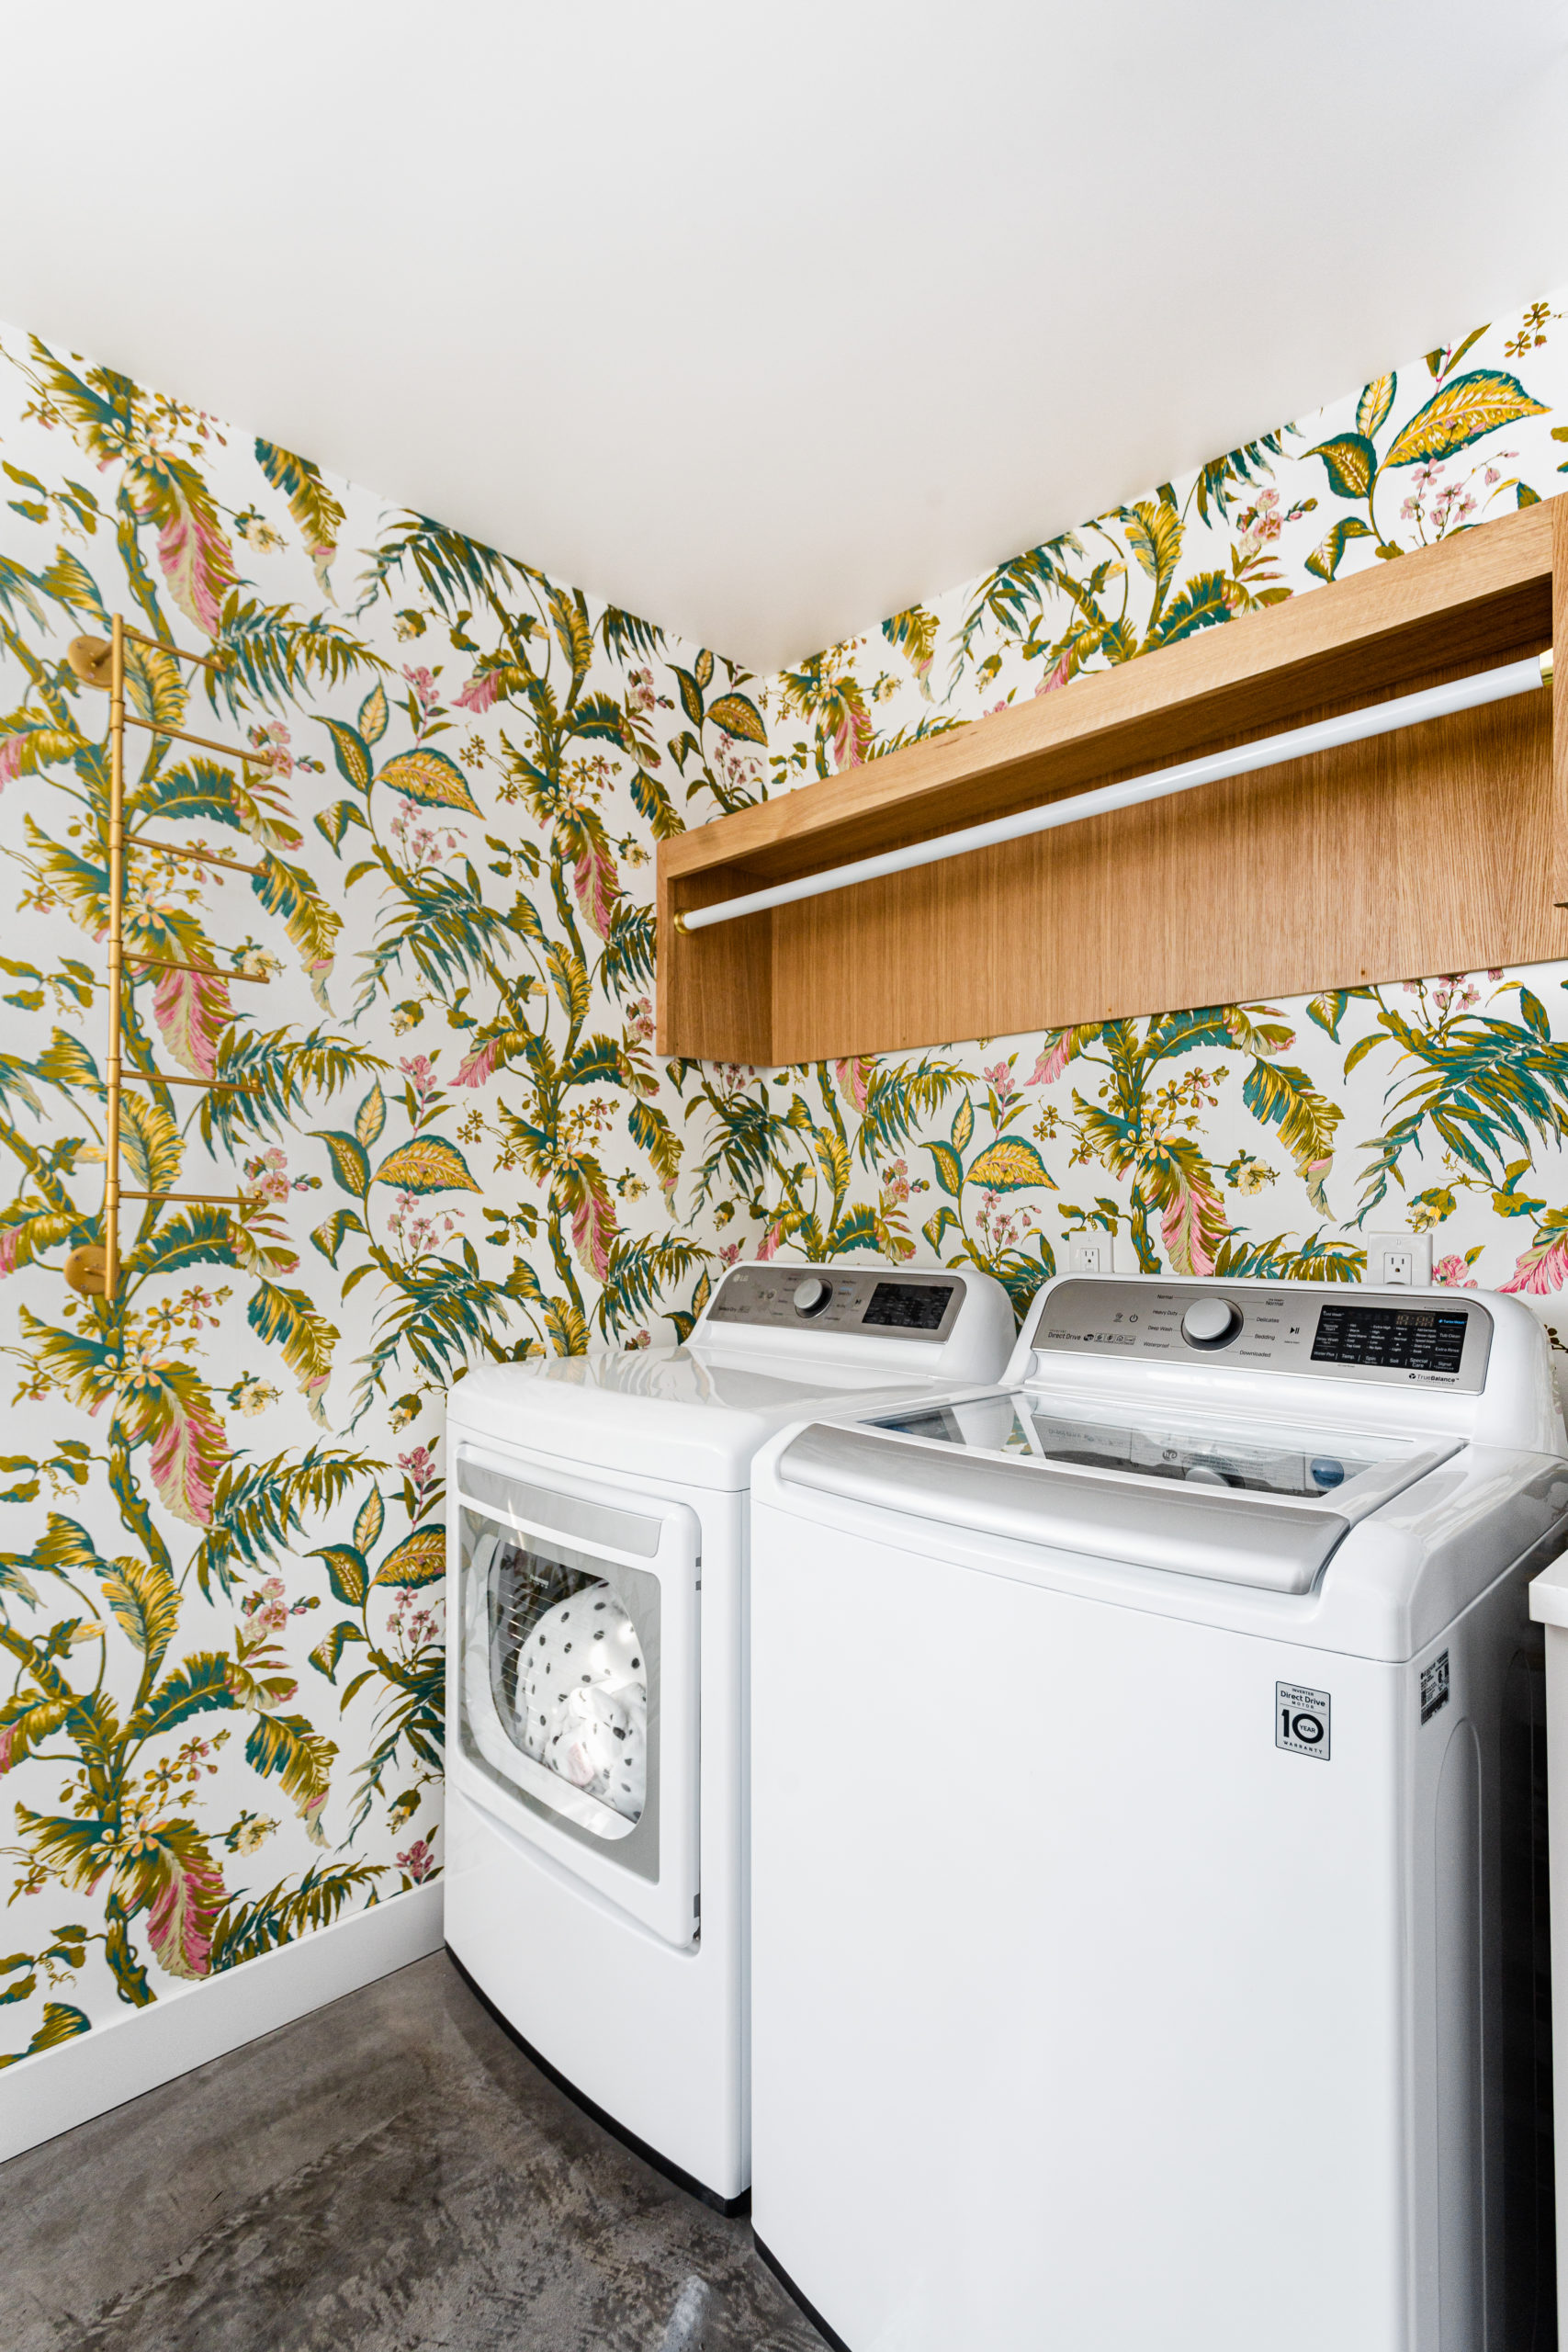 The Bradford, Laundry Room + Office Reveal | Before & After 22